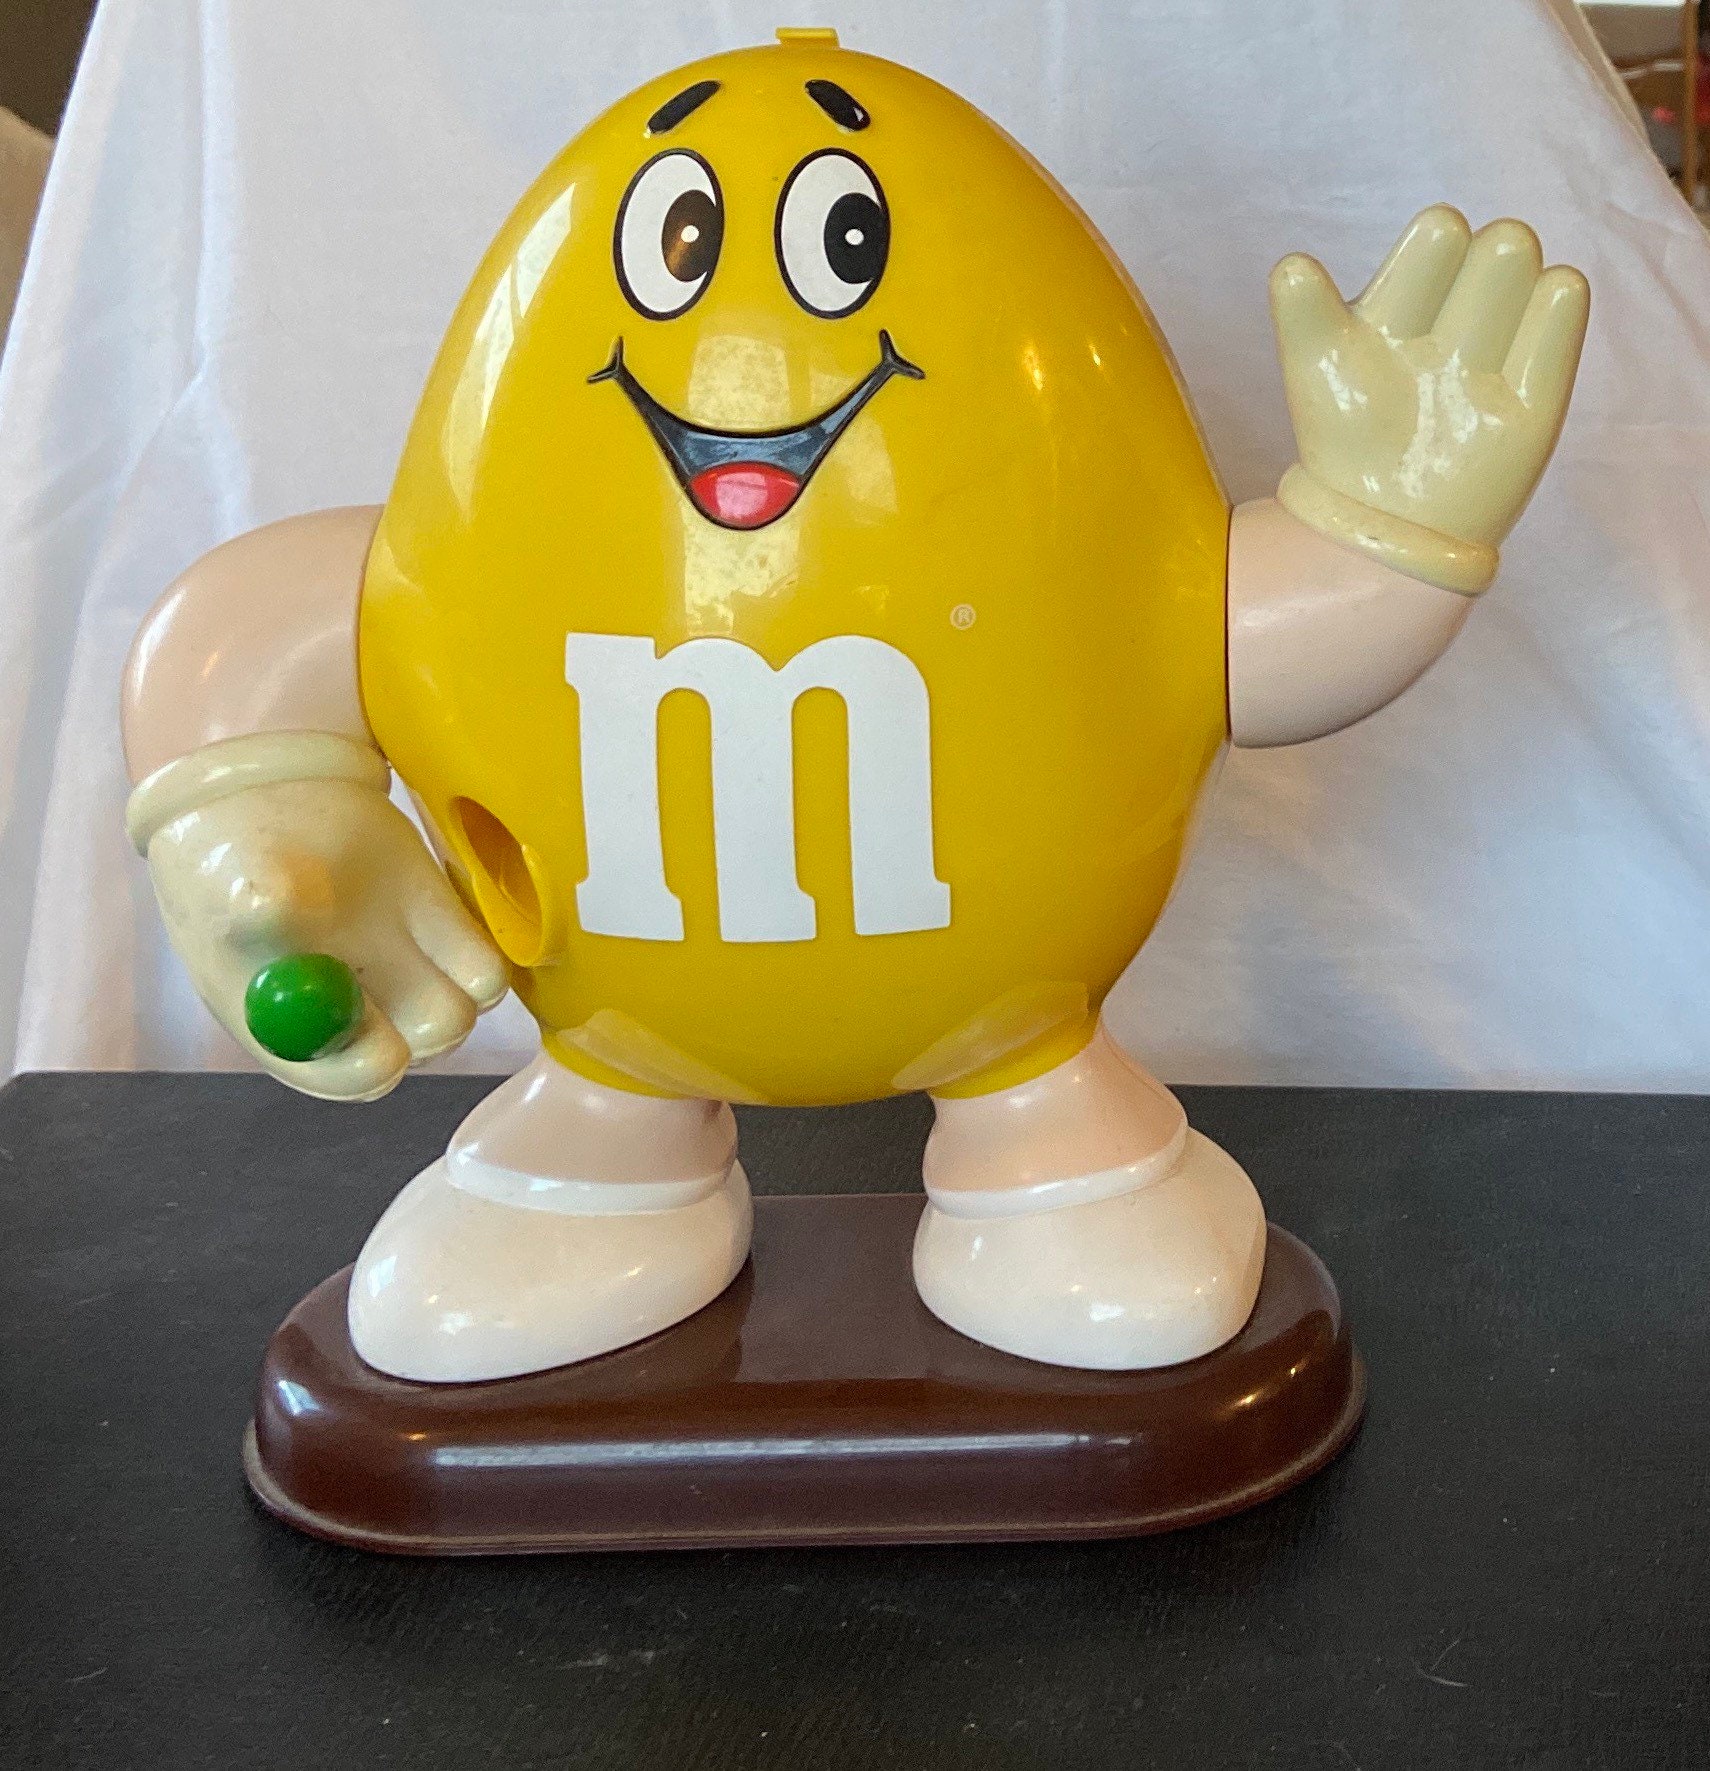 Vintage 1991 Yellow M&M Candy Dispenser Holding Green MM in 